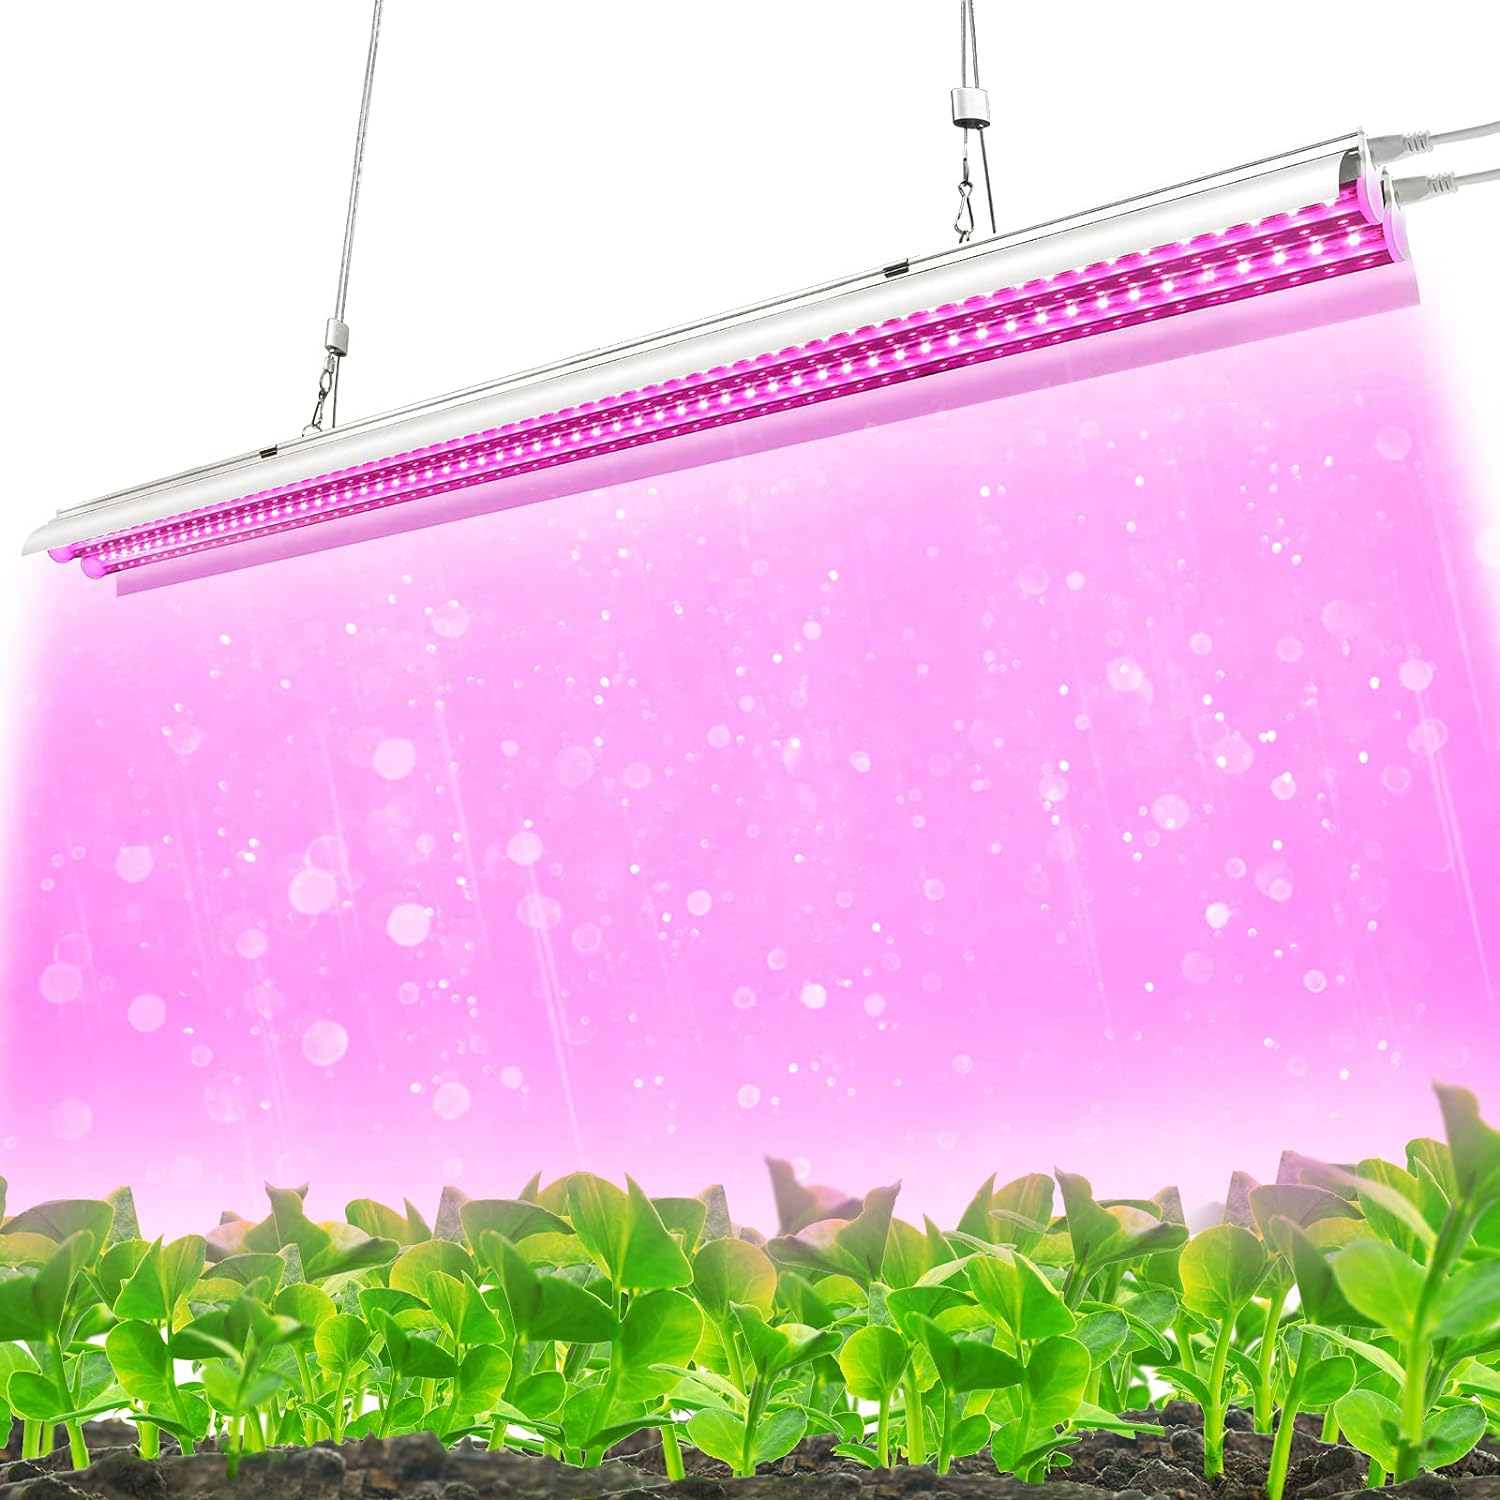 As a gardening enthusiast, I have always been on the lookout for innovative ways to bring out my plants' full potential. When it comes to indoor plant care and hydroponics systems, lighting is crucial in replicating natural sunlight conditions that promote growth, seedling development, flowering or blooming stages of various species. Thats why I was excited when Monios-L T5 LED Grow Light crossed my path!After owning the product for many months now and using it consistently on a daily basis wit